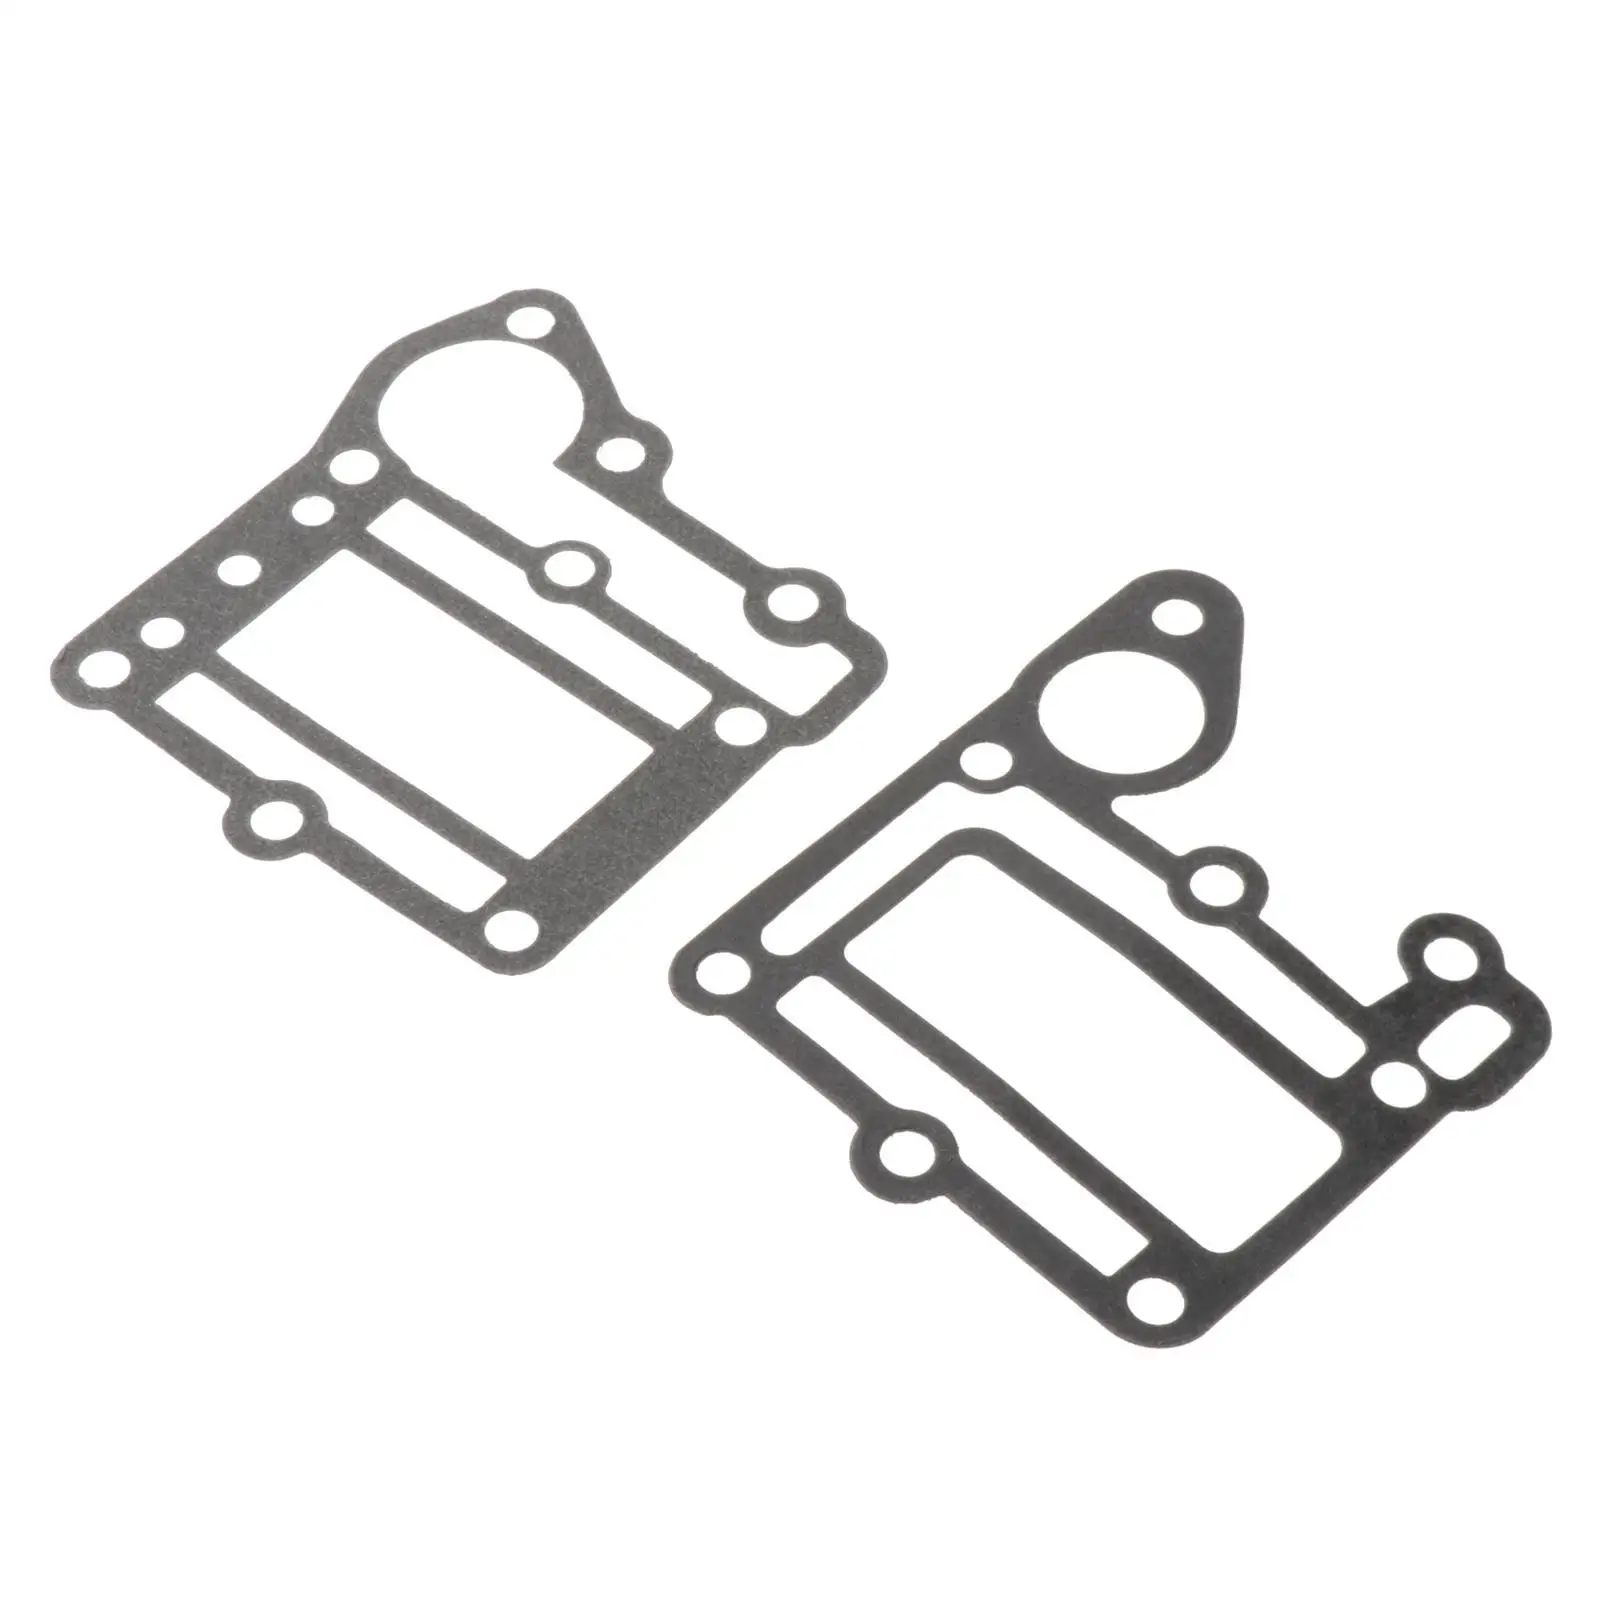 2x Exhaust Jacket Gasket Fit for 2T   6E0 6E0-41114 6E0-41112